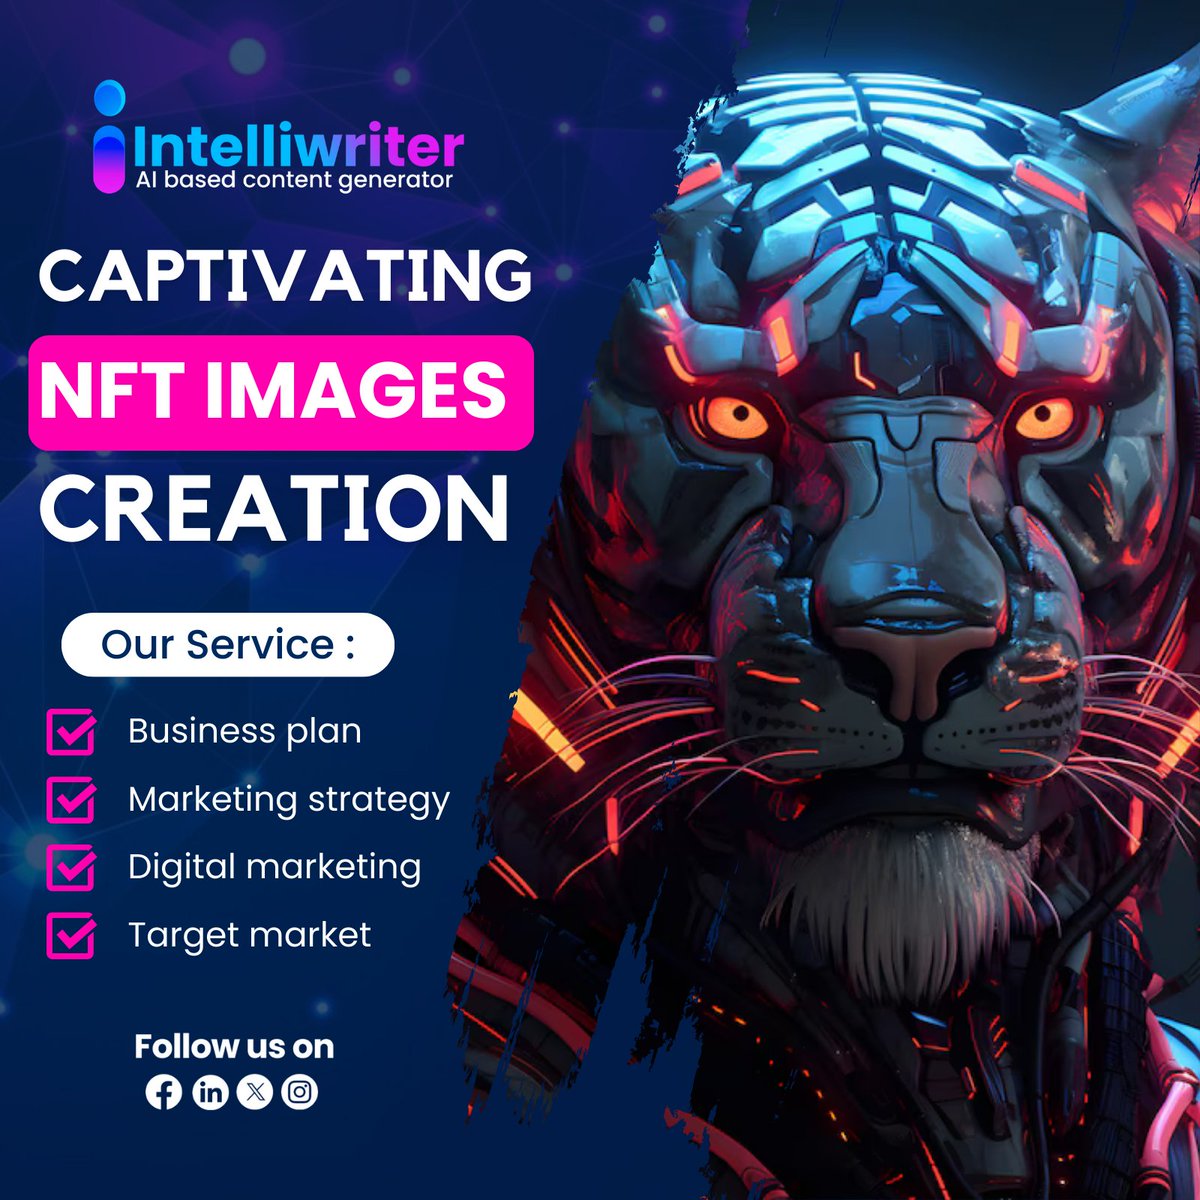 Unlock the Power of Captivating NFT Image Creation with Intelliwriter!🖼️

Elevate your business with Intelliwriter today!

📈 Business Plan Development
📣 Digital Marketing Solutions
🚀 Marketing Strategy Creation

intelliwriter.io
#Intelliwriter #AIBasedContentGenerator